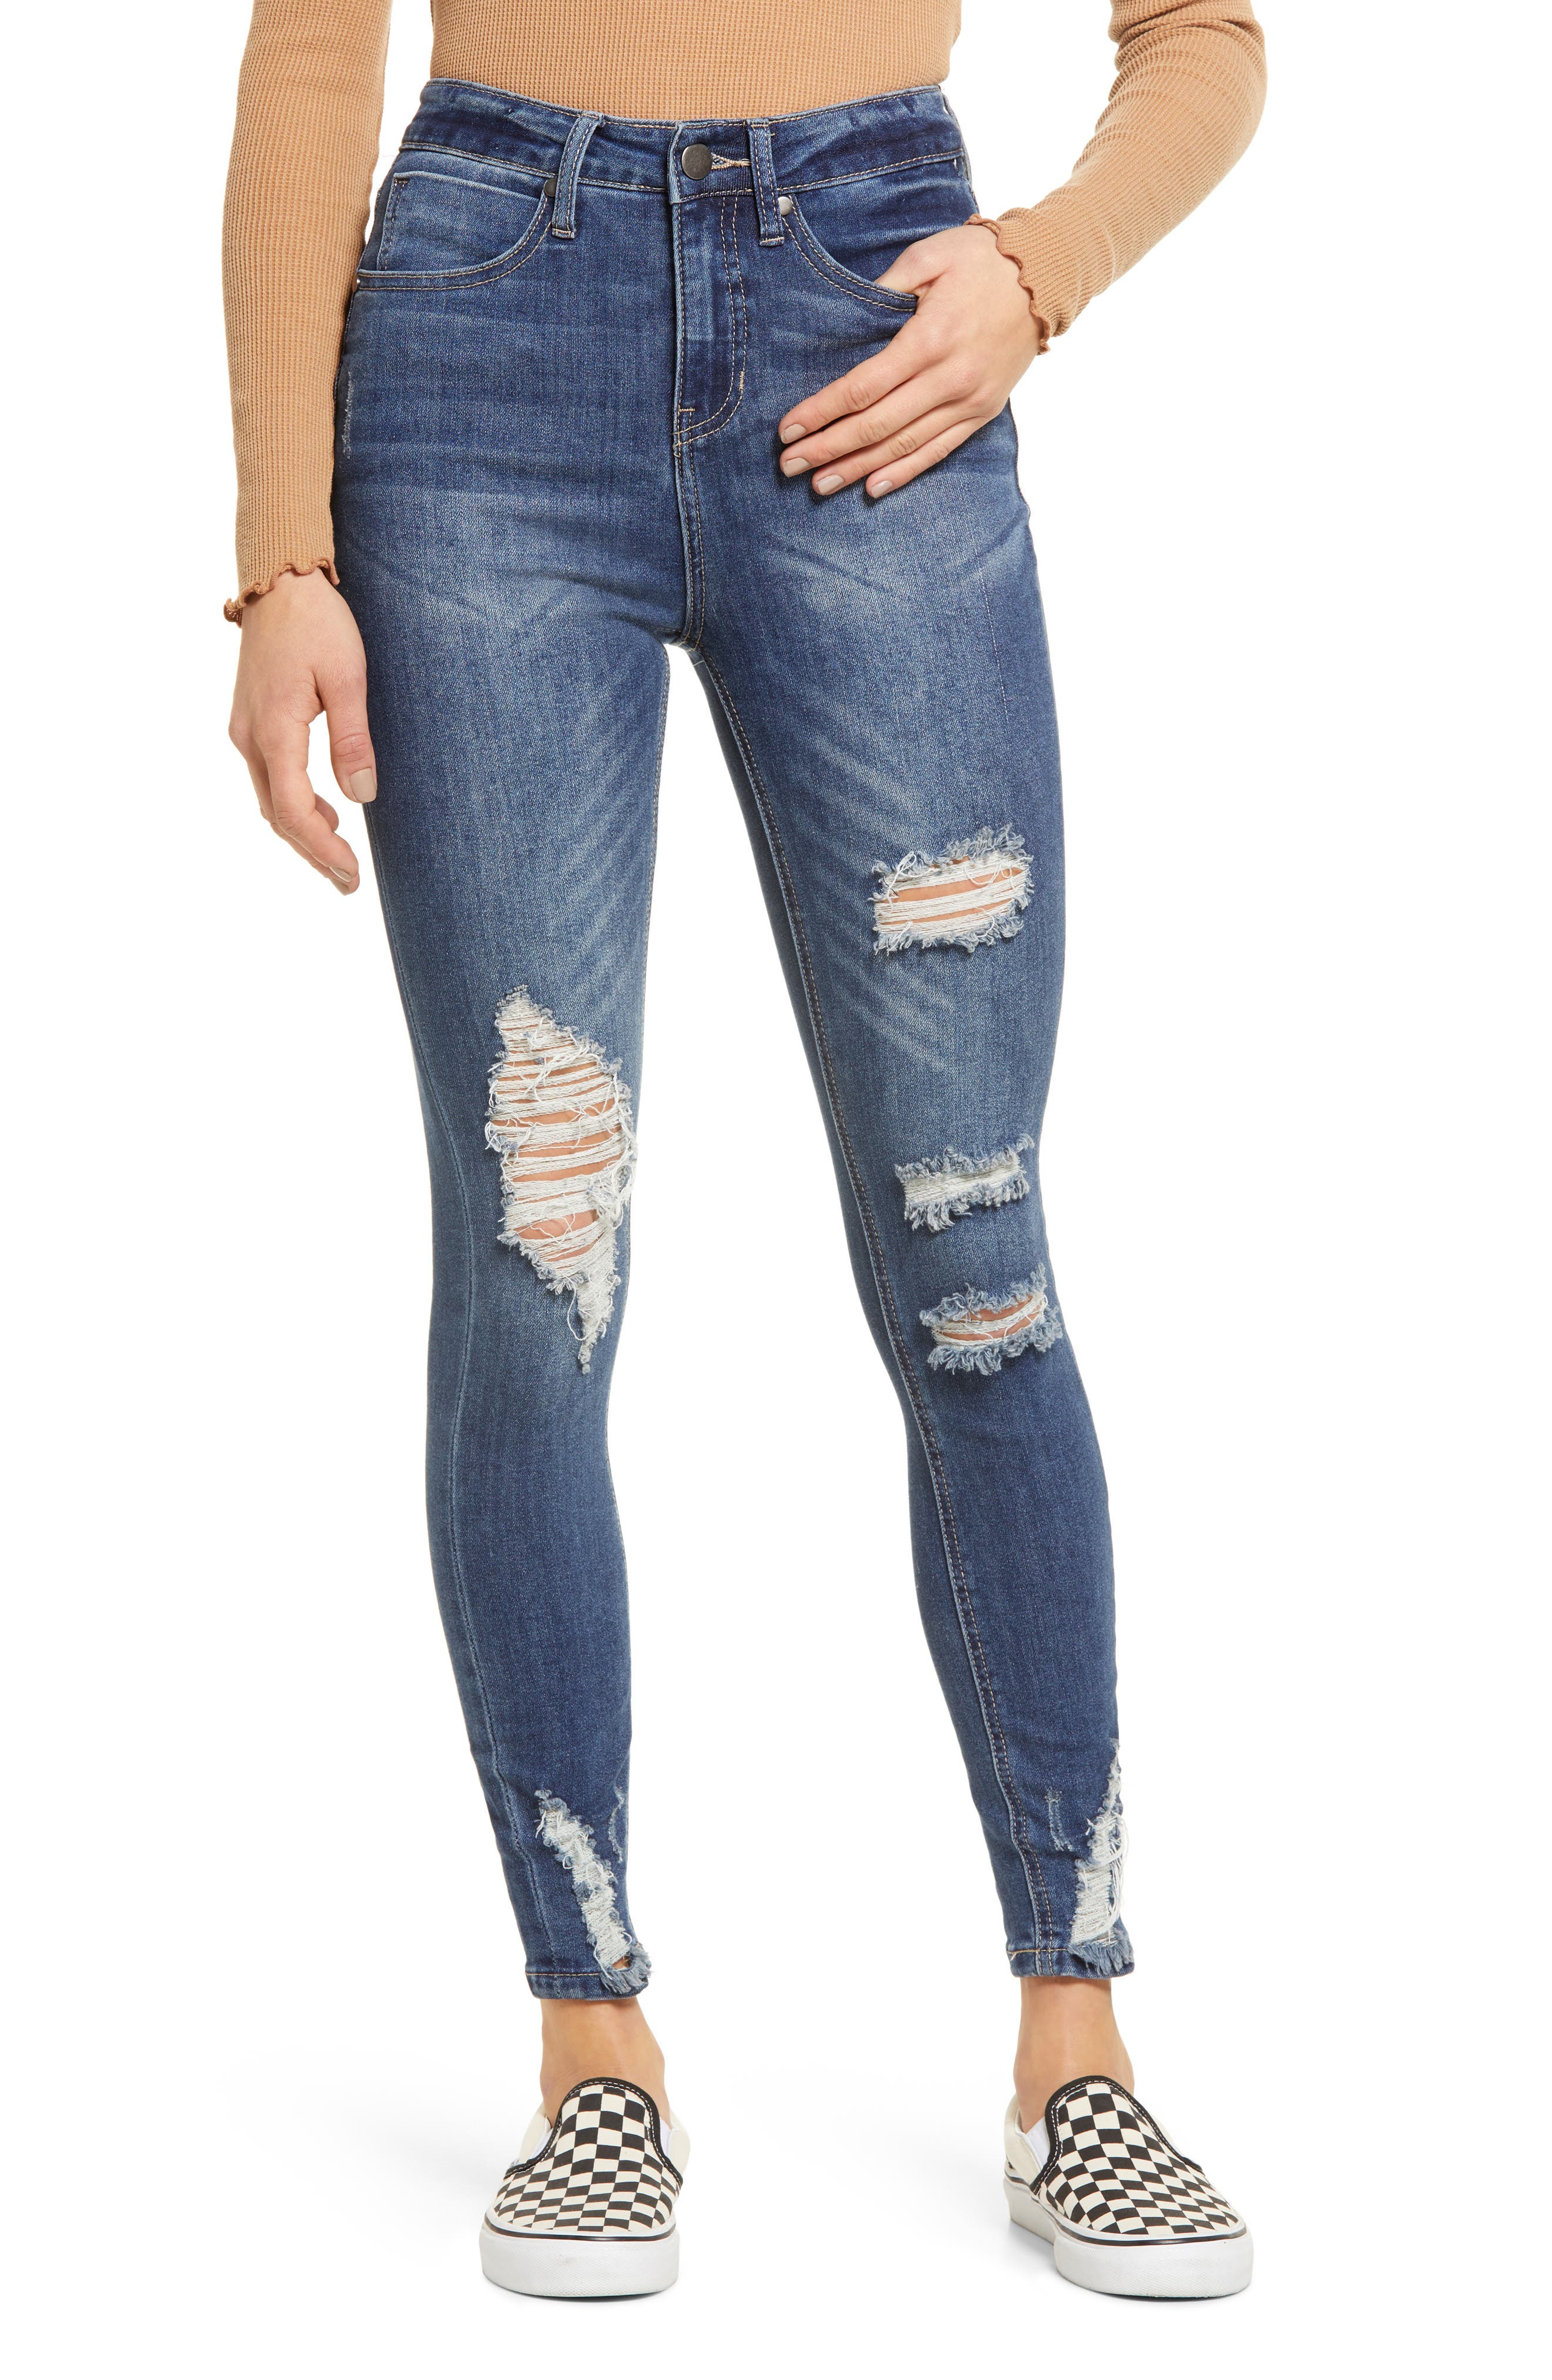 super skinny blue ripped jeans womens